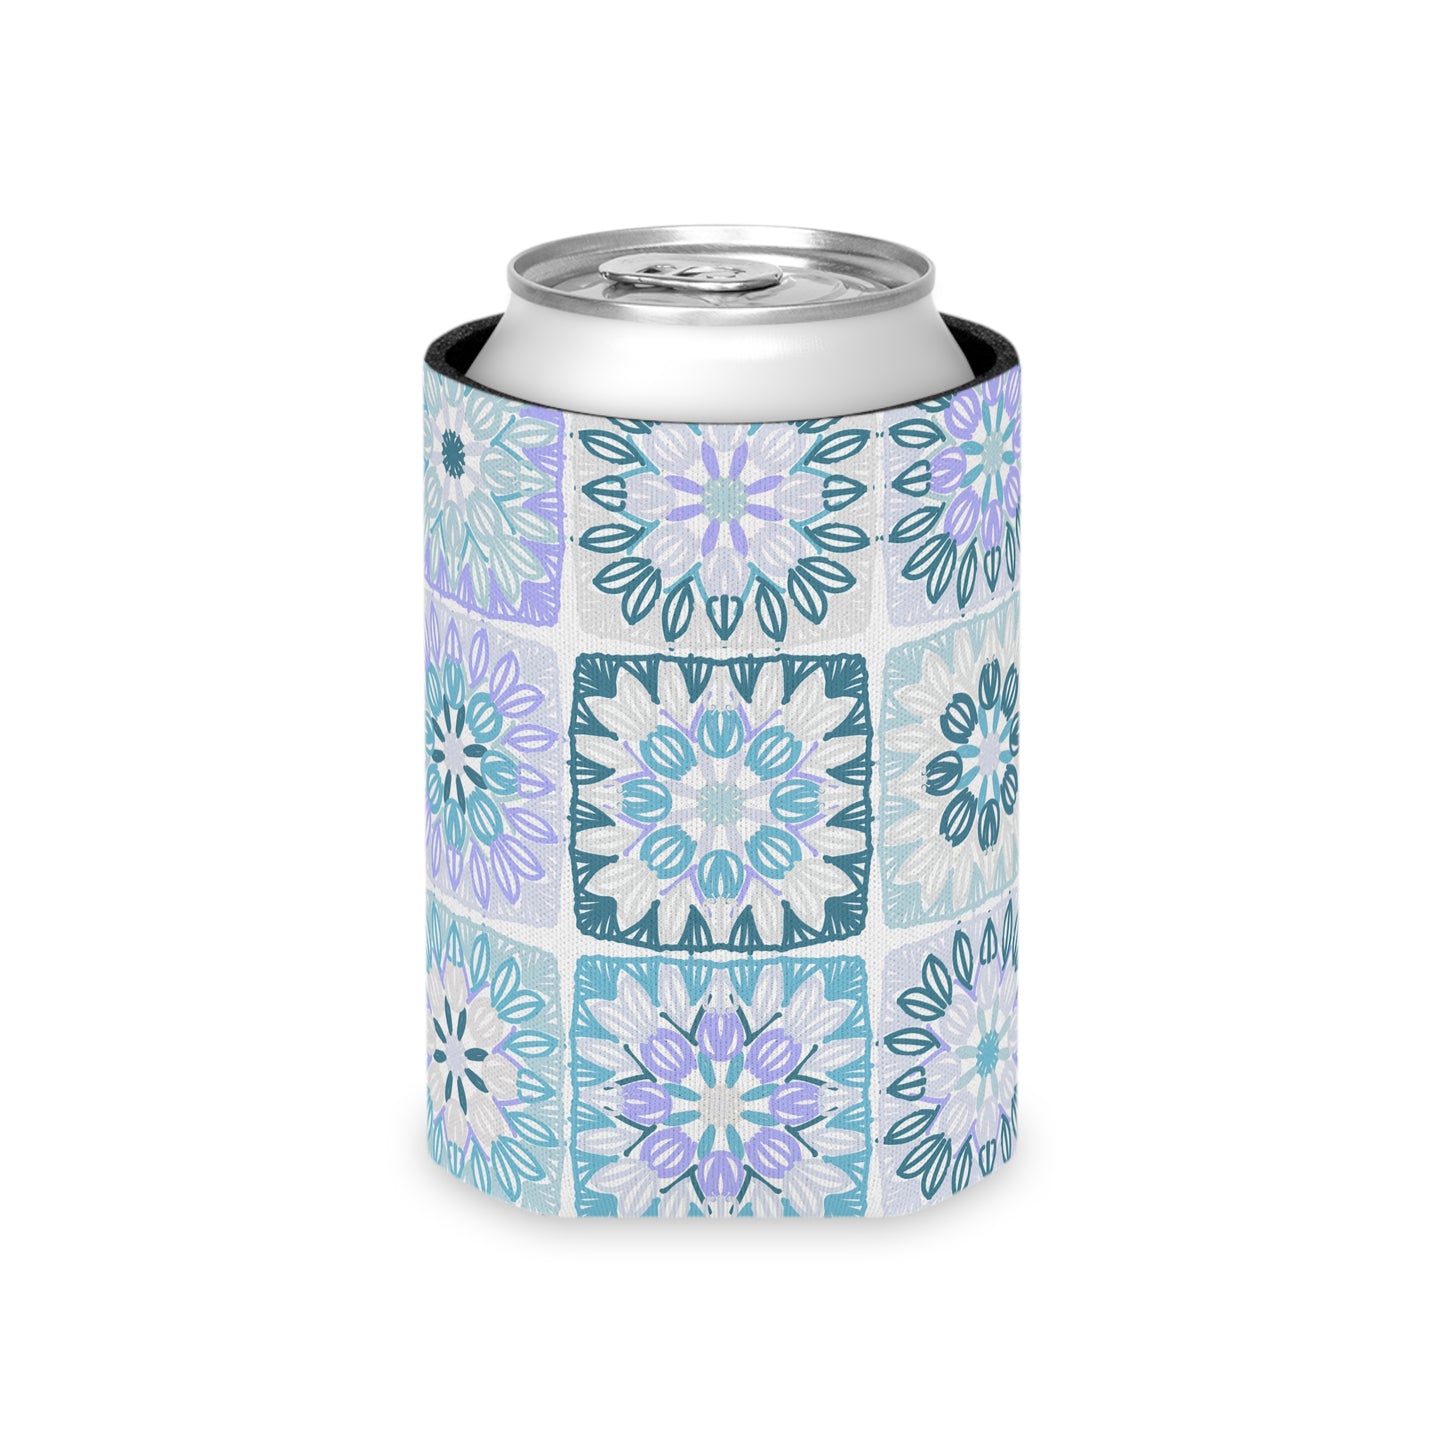 Granny Square in Blueberry Milk | Can Cooler | Crochet | Yarn | Knit | Craft